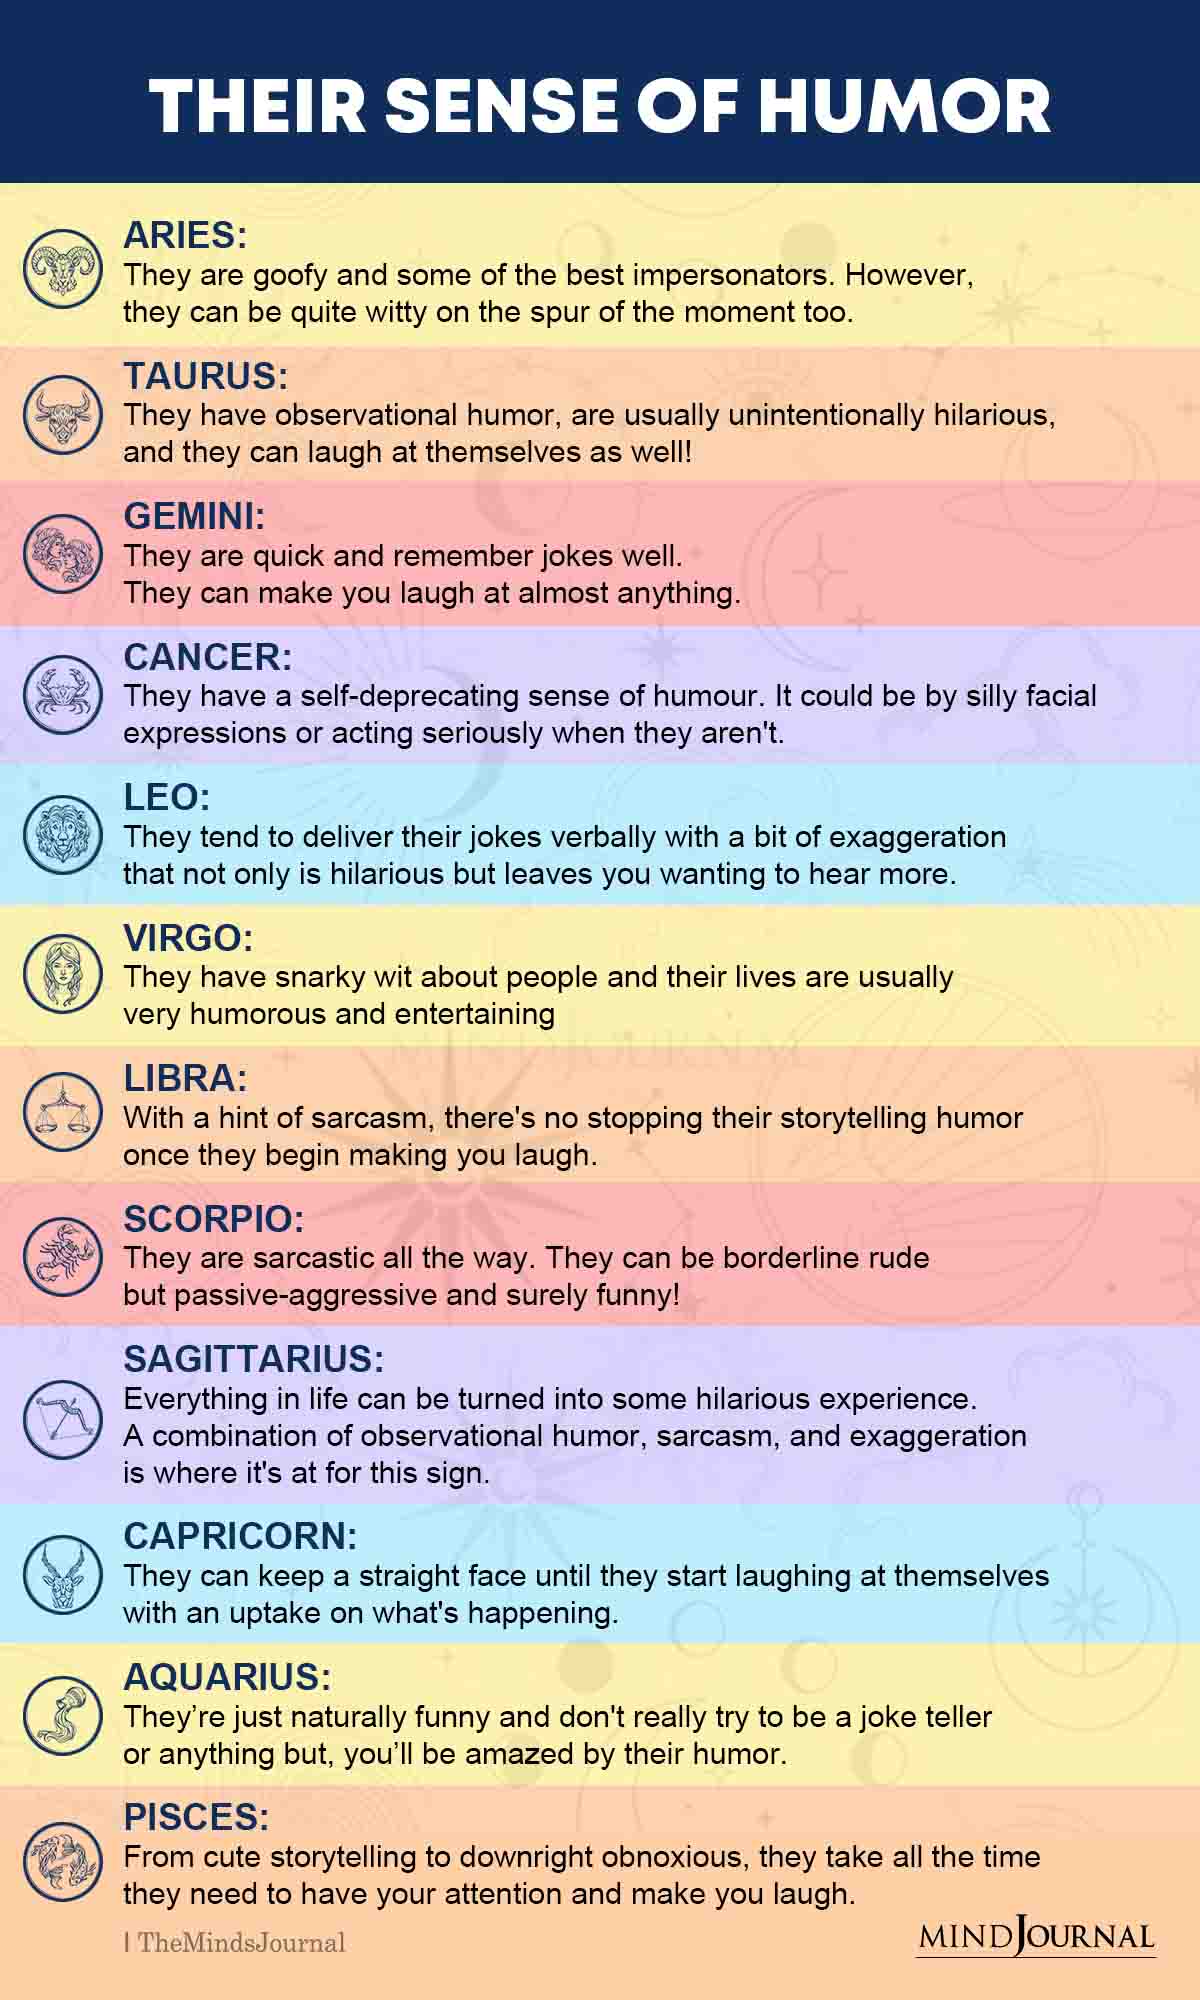 The 12 Zodiac Signs and Their Sense of Humor